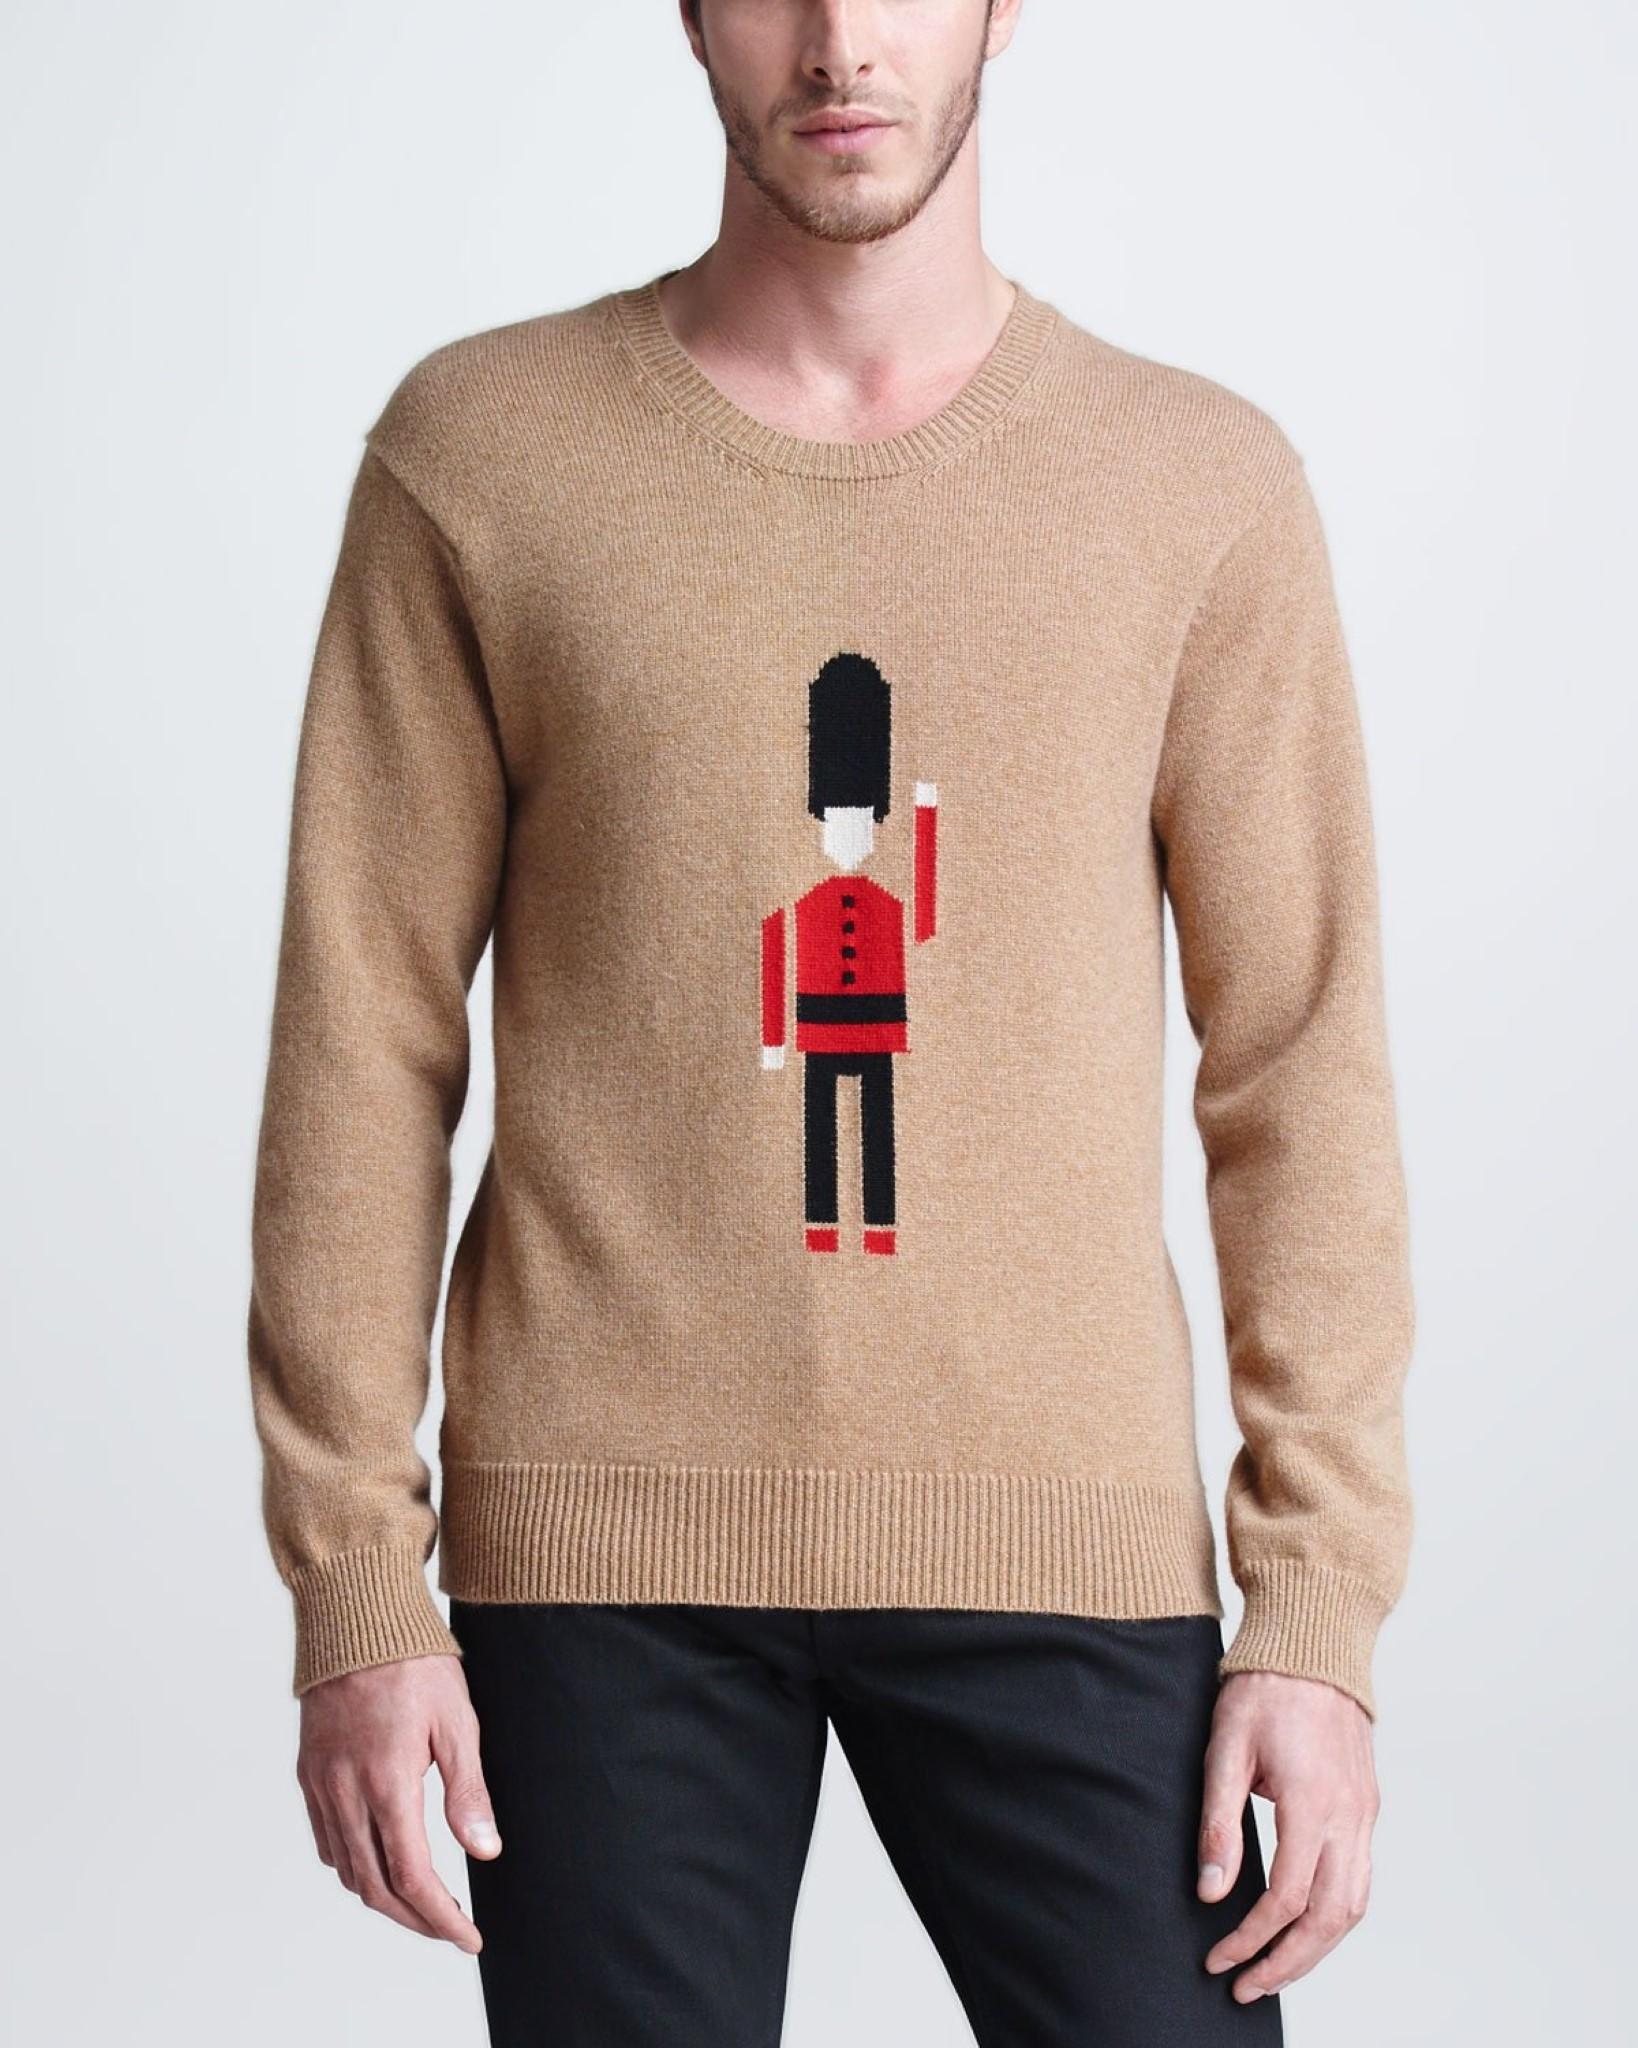 BURBERRY PRORSUM Pre-Fall 2013 sweater comes in a tan & red cashmere with a front 'Solider Guard Inarsia' design featuring a ribbed hem and a crew-neck. Made in United Kingdom. 

Very Good Pre-Owned Condition.
Marked: L

Measurements:

Shoulder: 19